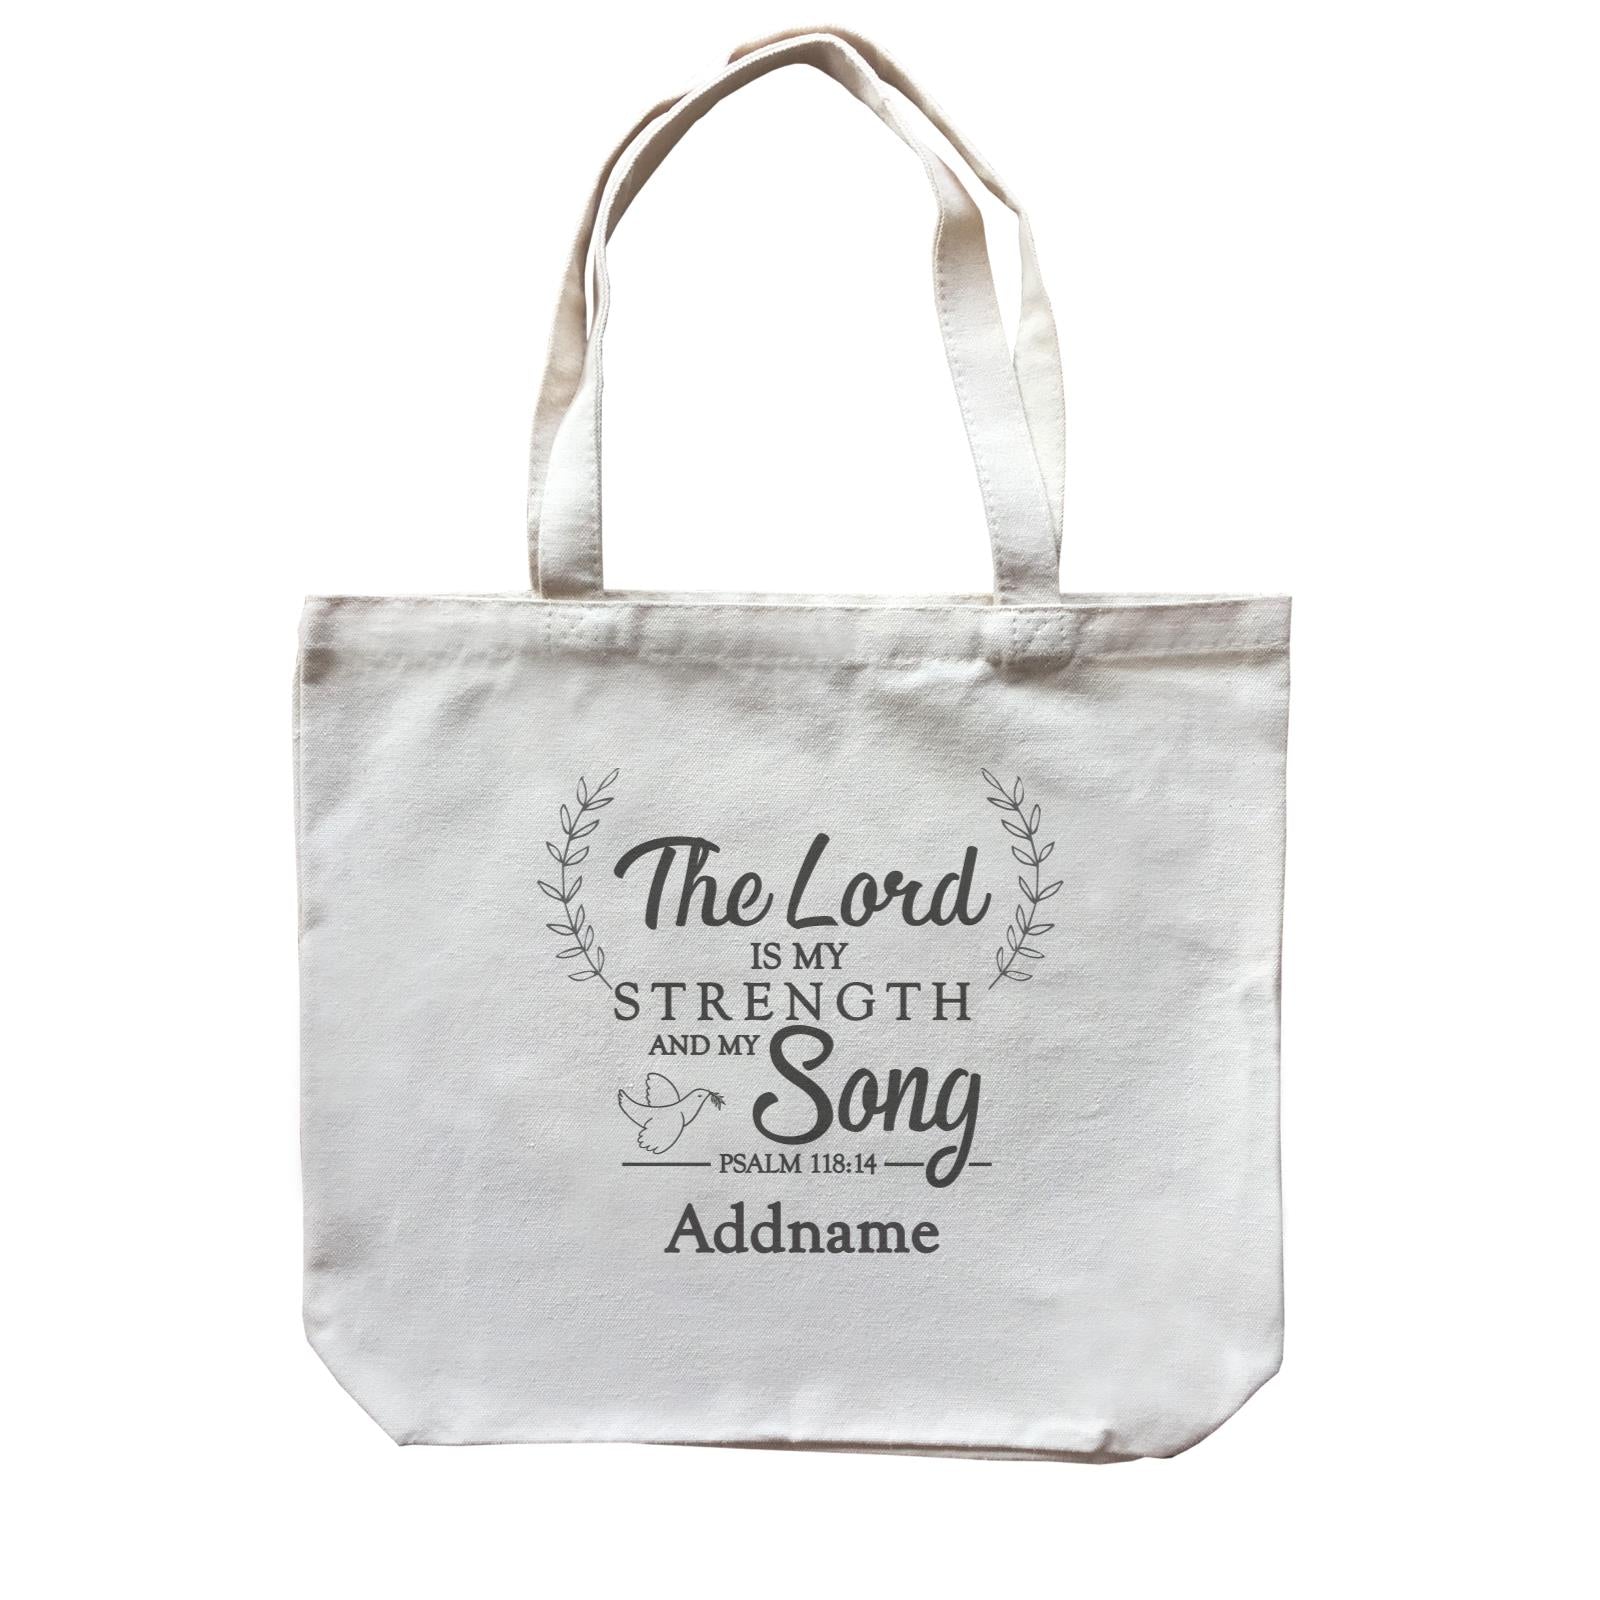 Christian Series The Lord Is My Strength Song Psalm 118.14 Addname Canvas Bag